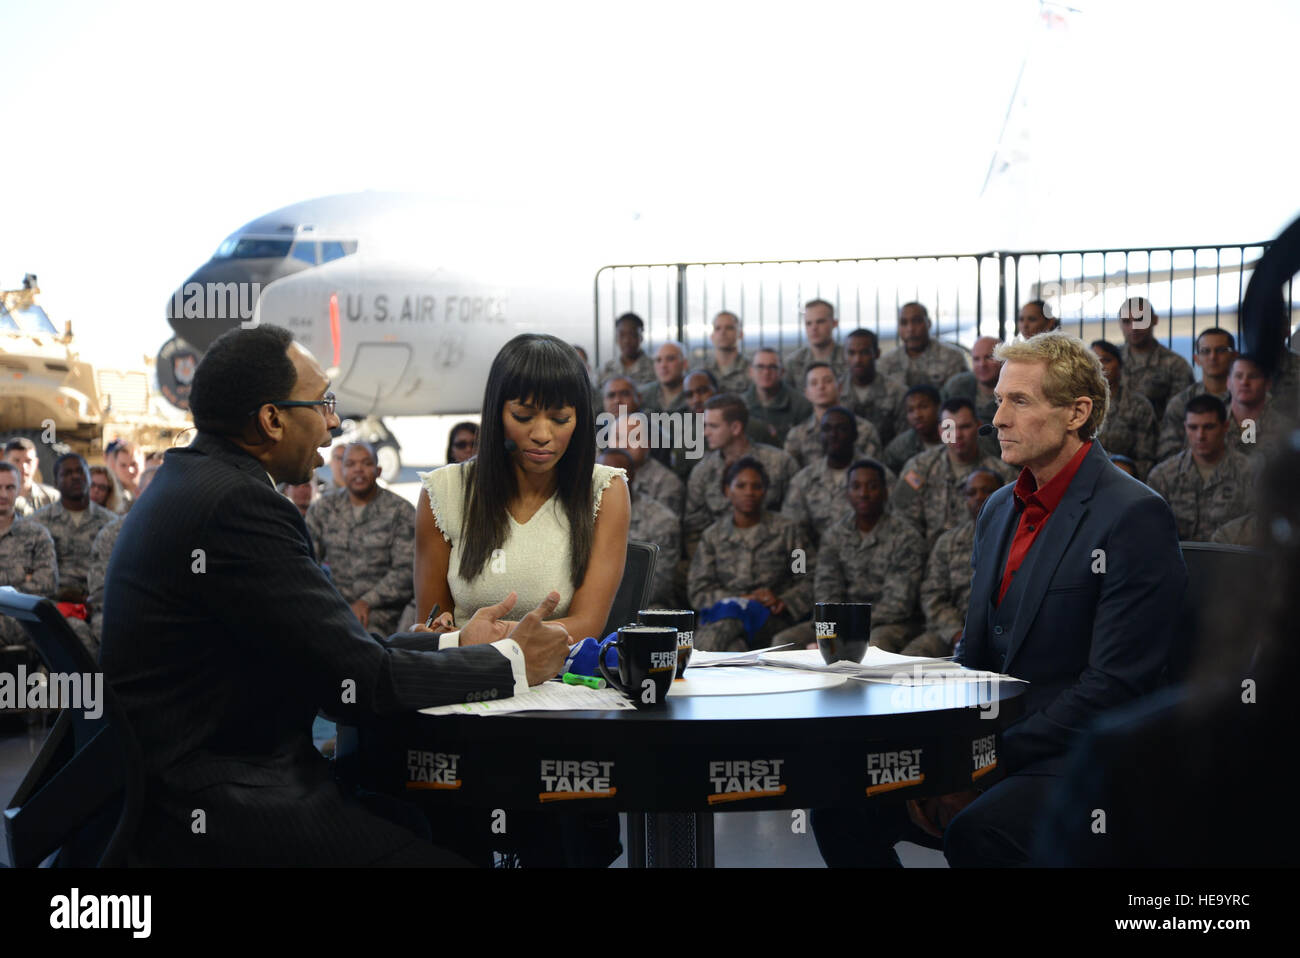 Airmen with the 108th Wing attend a special live broadcast of ESPN’s “First Take” hosted by Stephen A. Smith, Skip Bayless and Cari Champion, Nov. 10, 2014, at Joint Base McGuire-Dix-Lakehurst, N.J. The “Salute the Troops” broadcast in honor of Veterans Day was set with a backdrop of a KC-10 Extender and KC-135 Stratotanker, and various other military vehicles. (/Tech. Sgt. Carl Clegg) Stock Photo